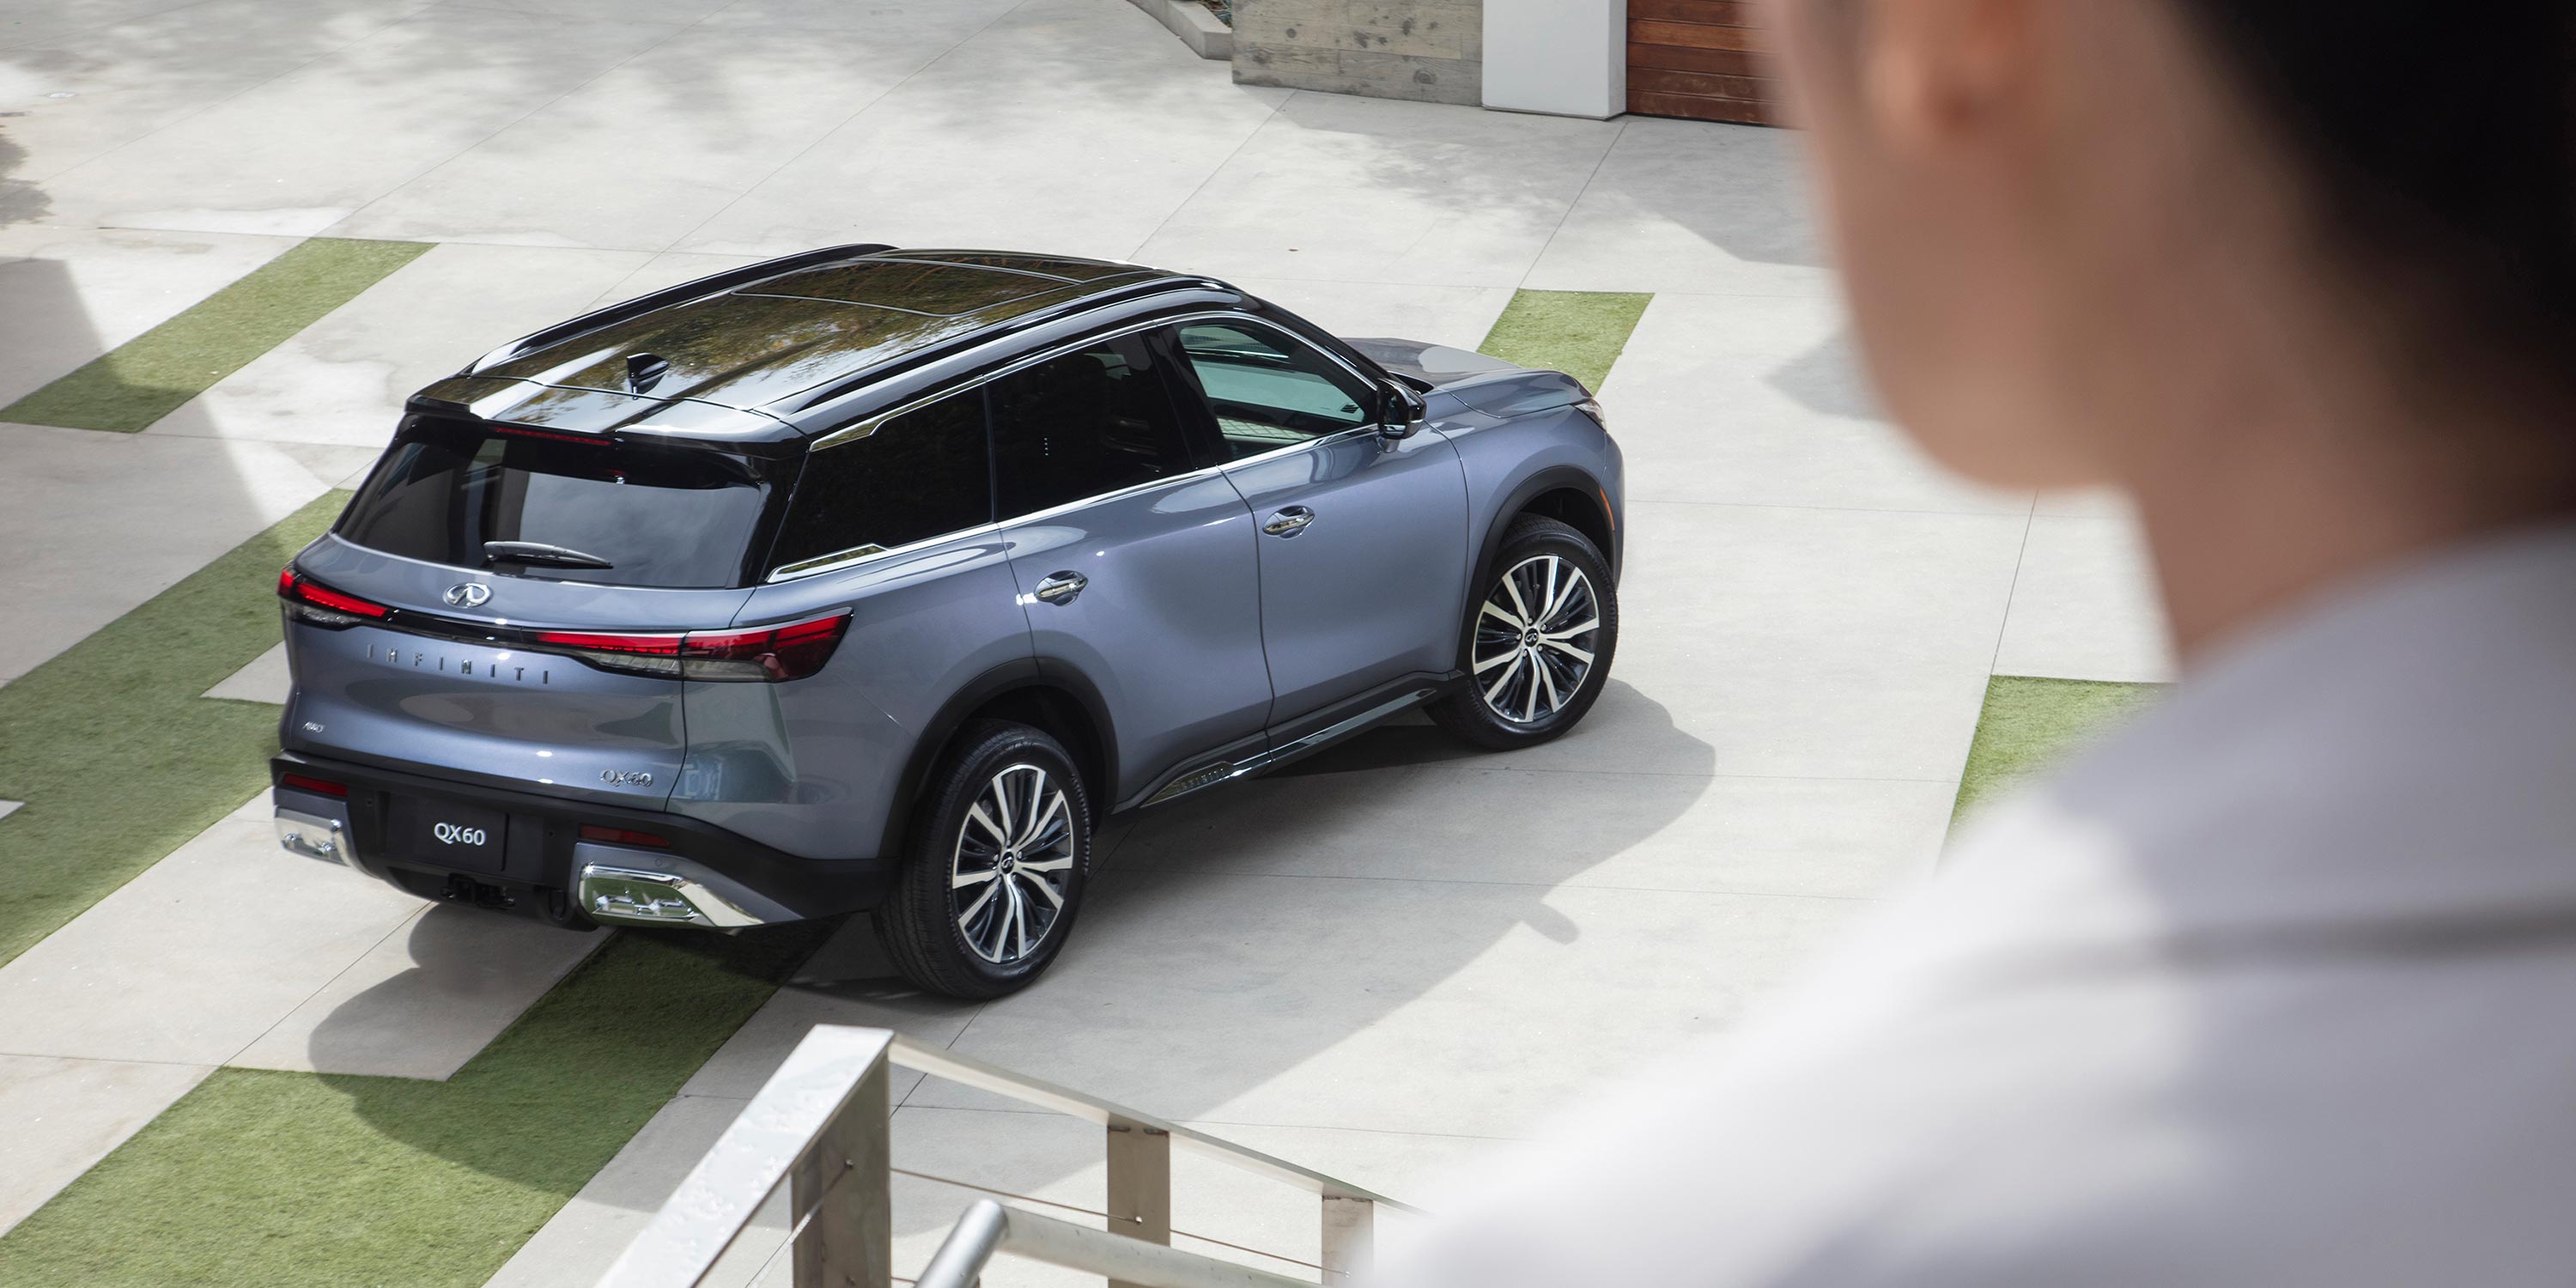 2022 INFINITI QX60 Crossover SUV parked in front of stairs